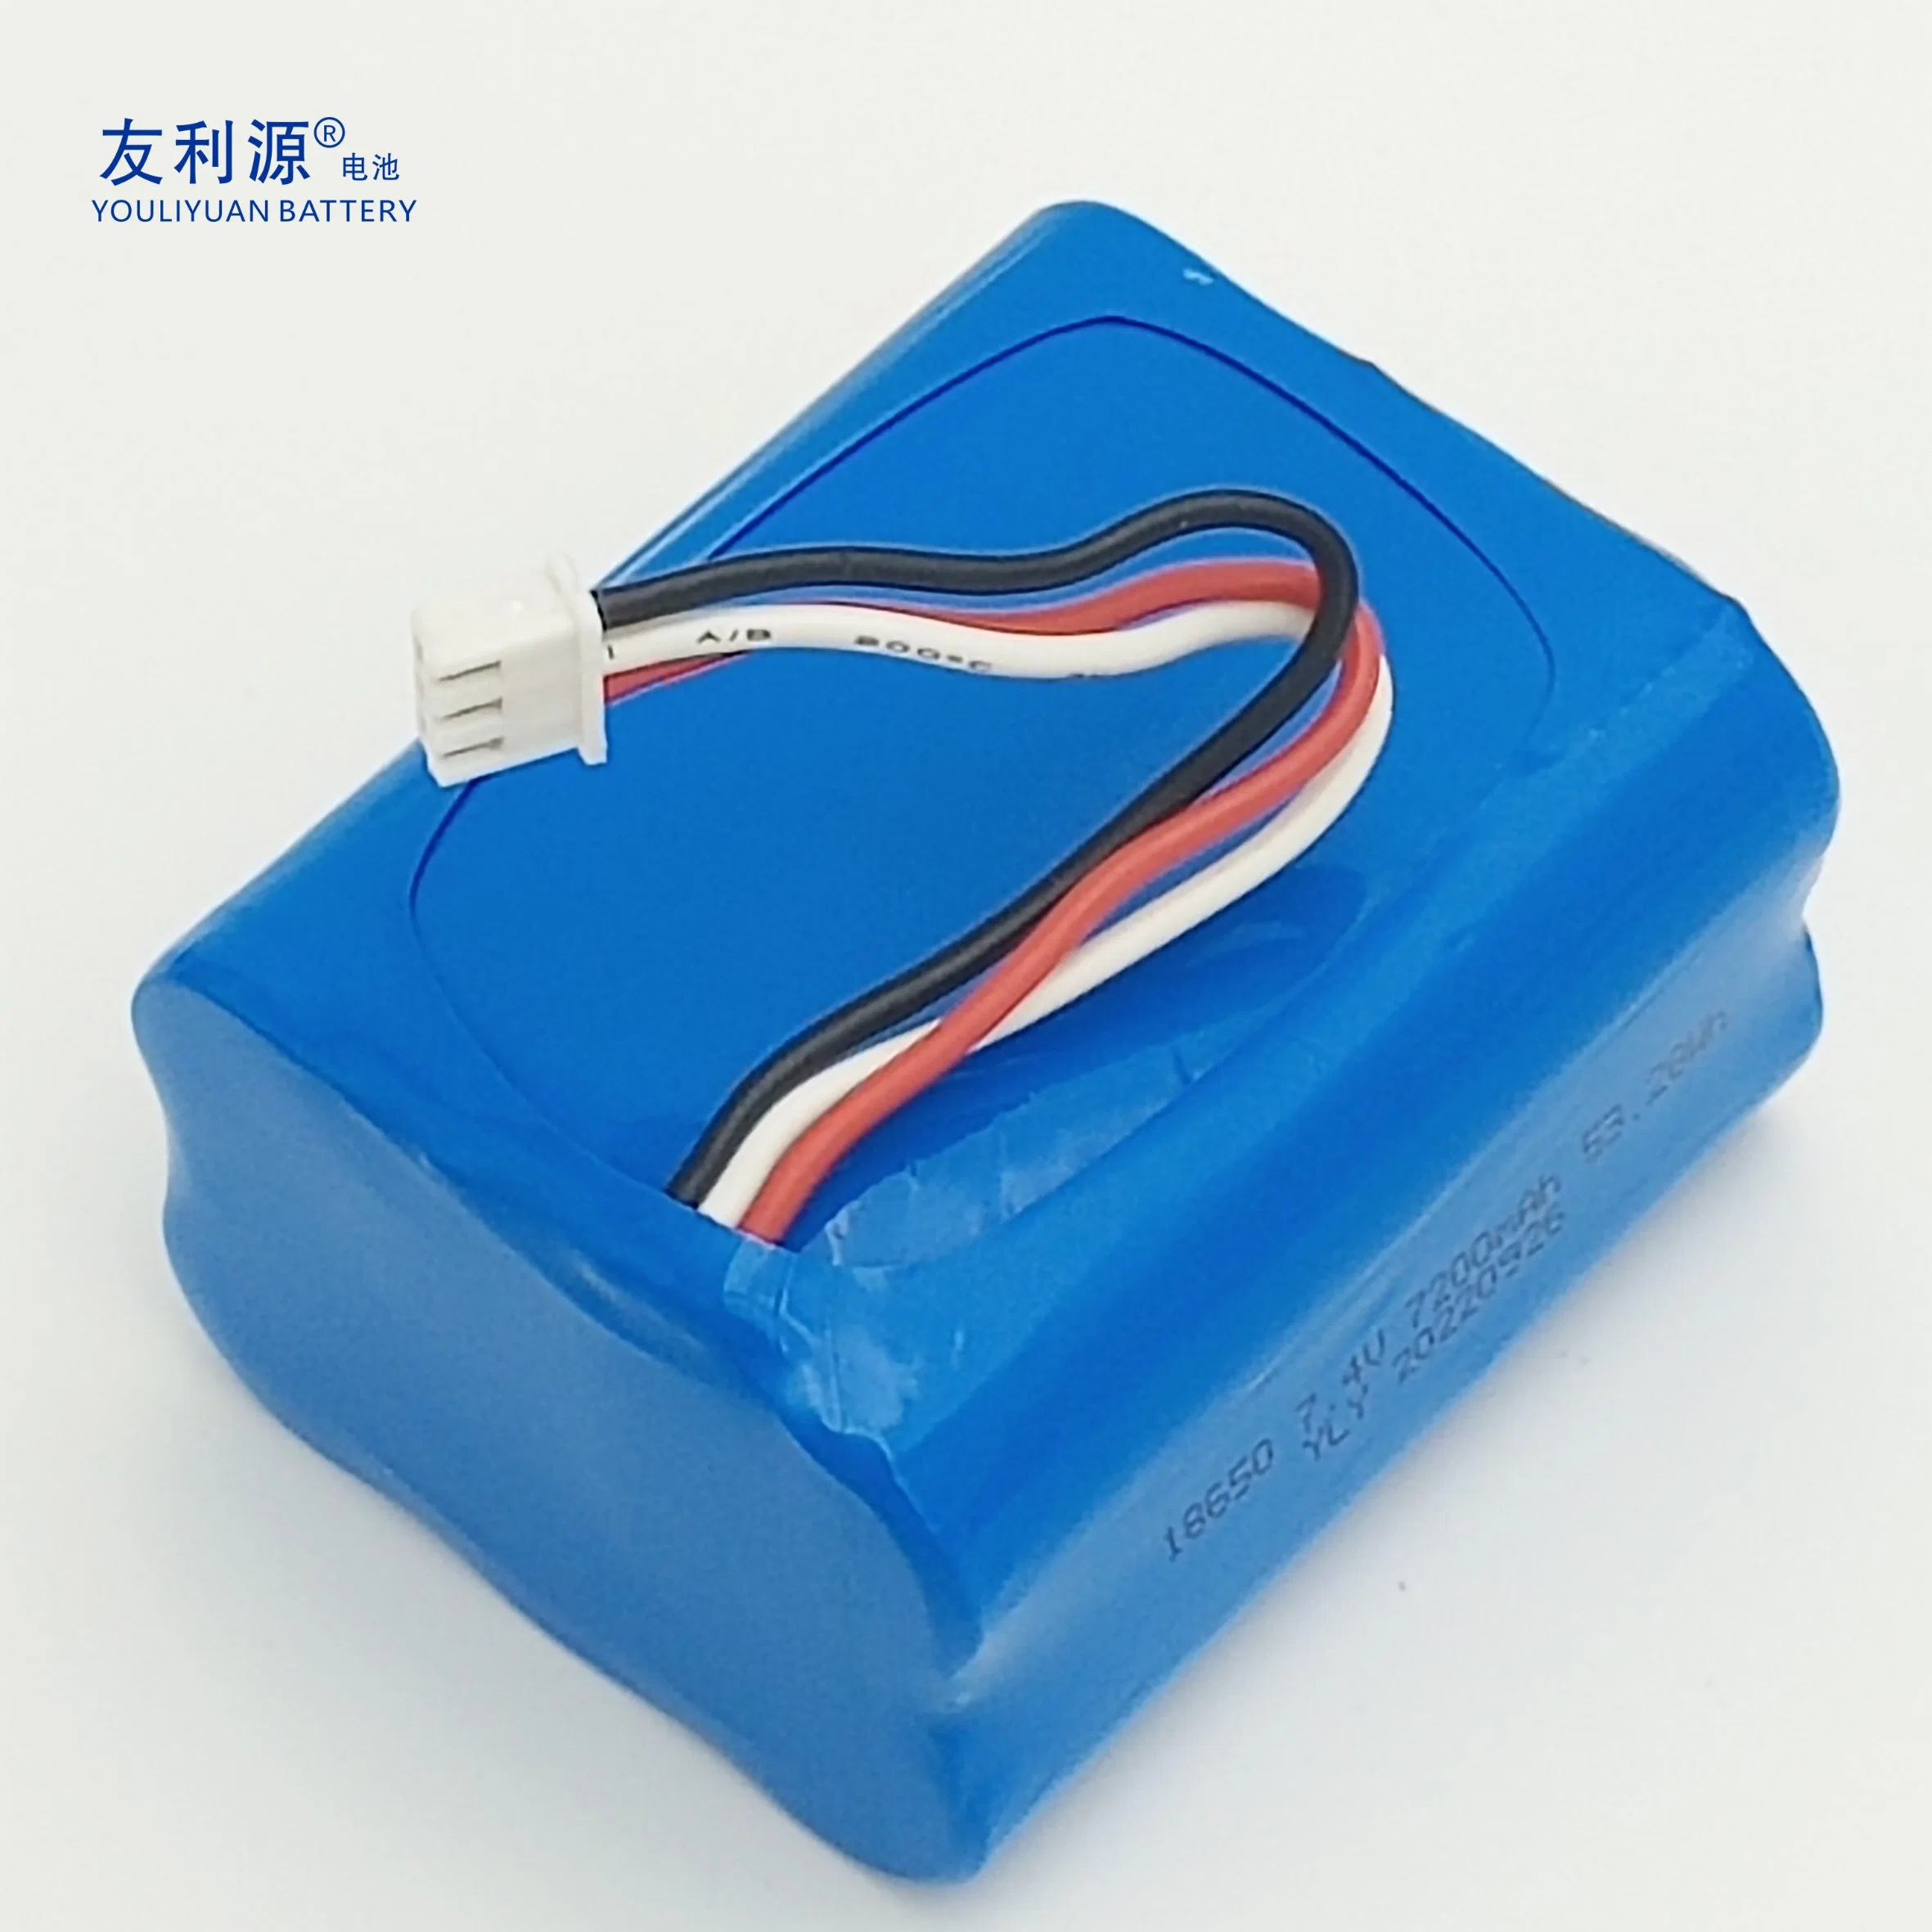 Factory Price 7.4V 7.2ah 2s3p 18650 Rechargeable Lithium Battery Pack for Consumer Electronics LED Lights